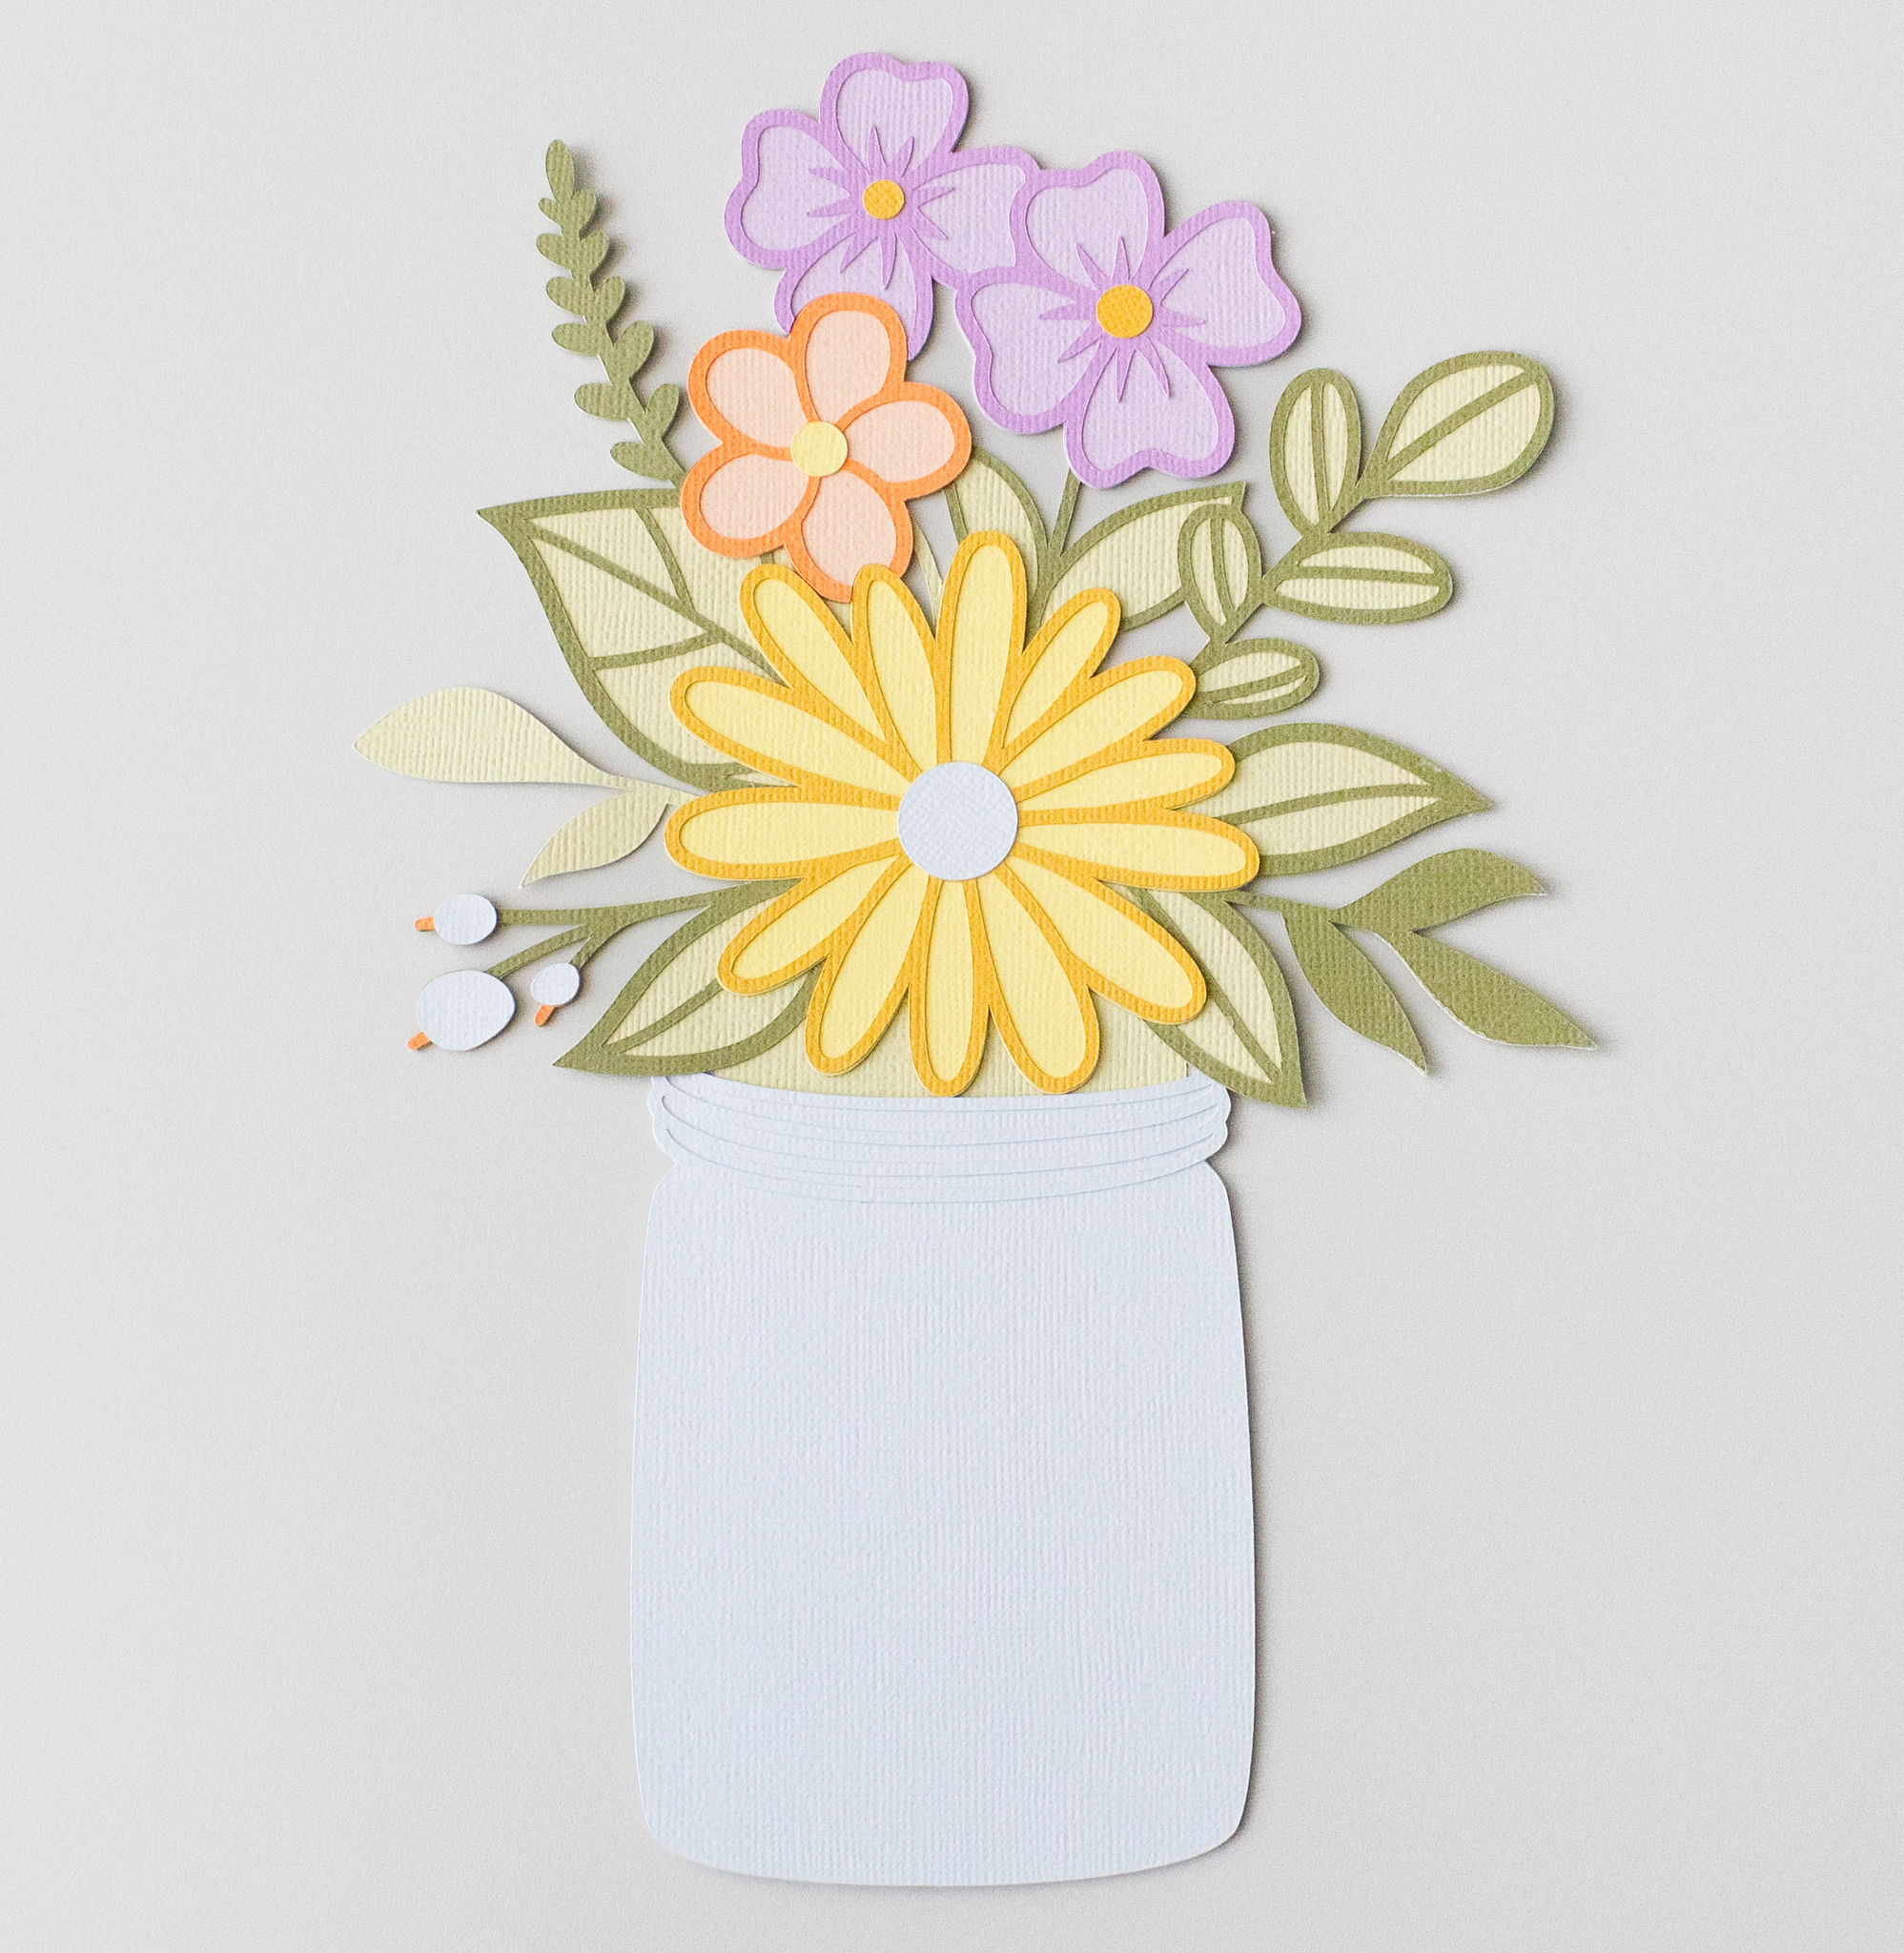 Gift card holder with bouquet of wild flowers in a jar. 